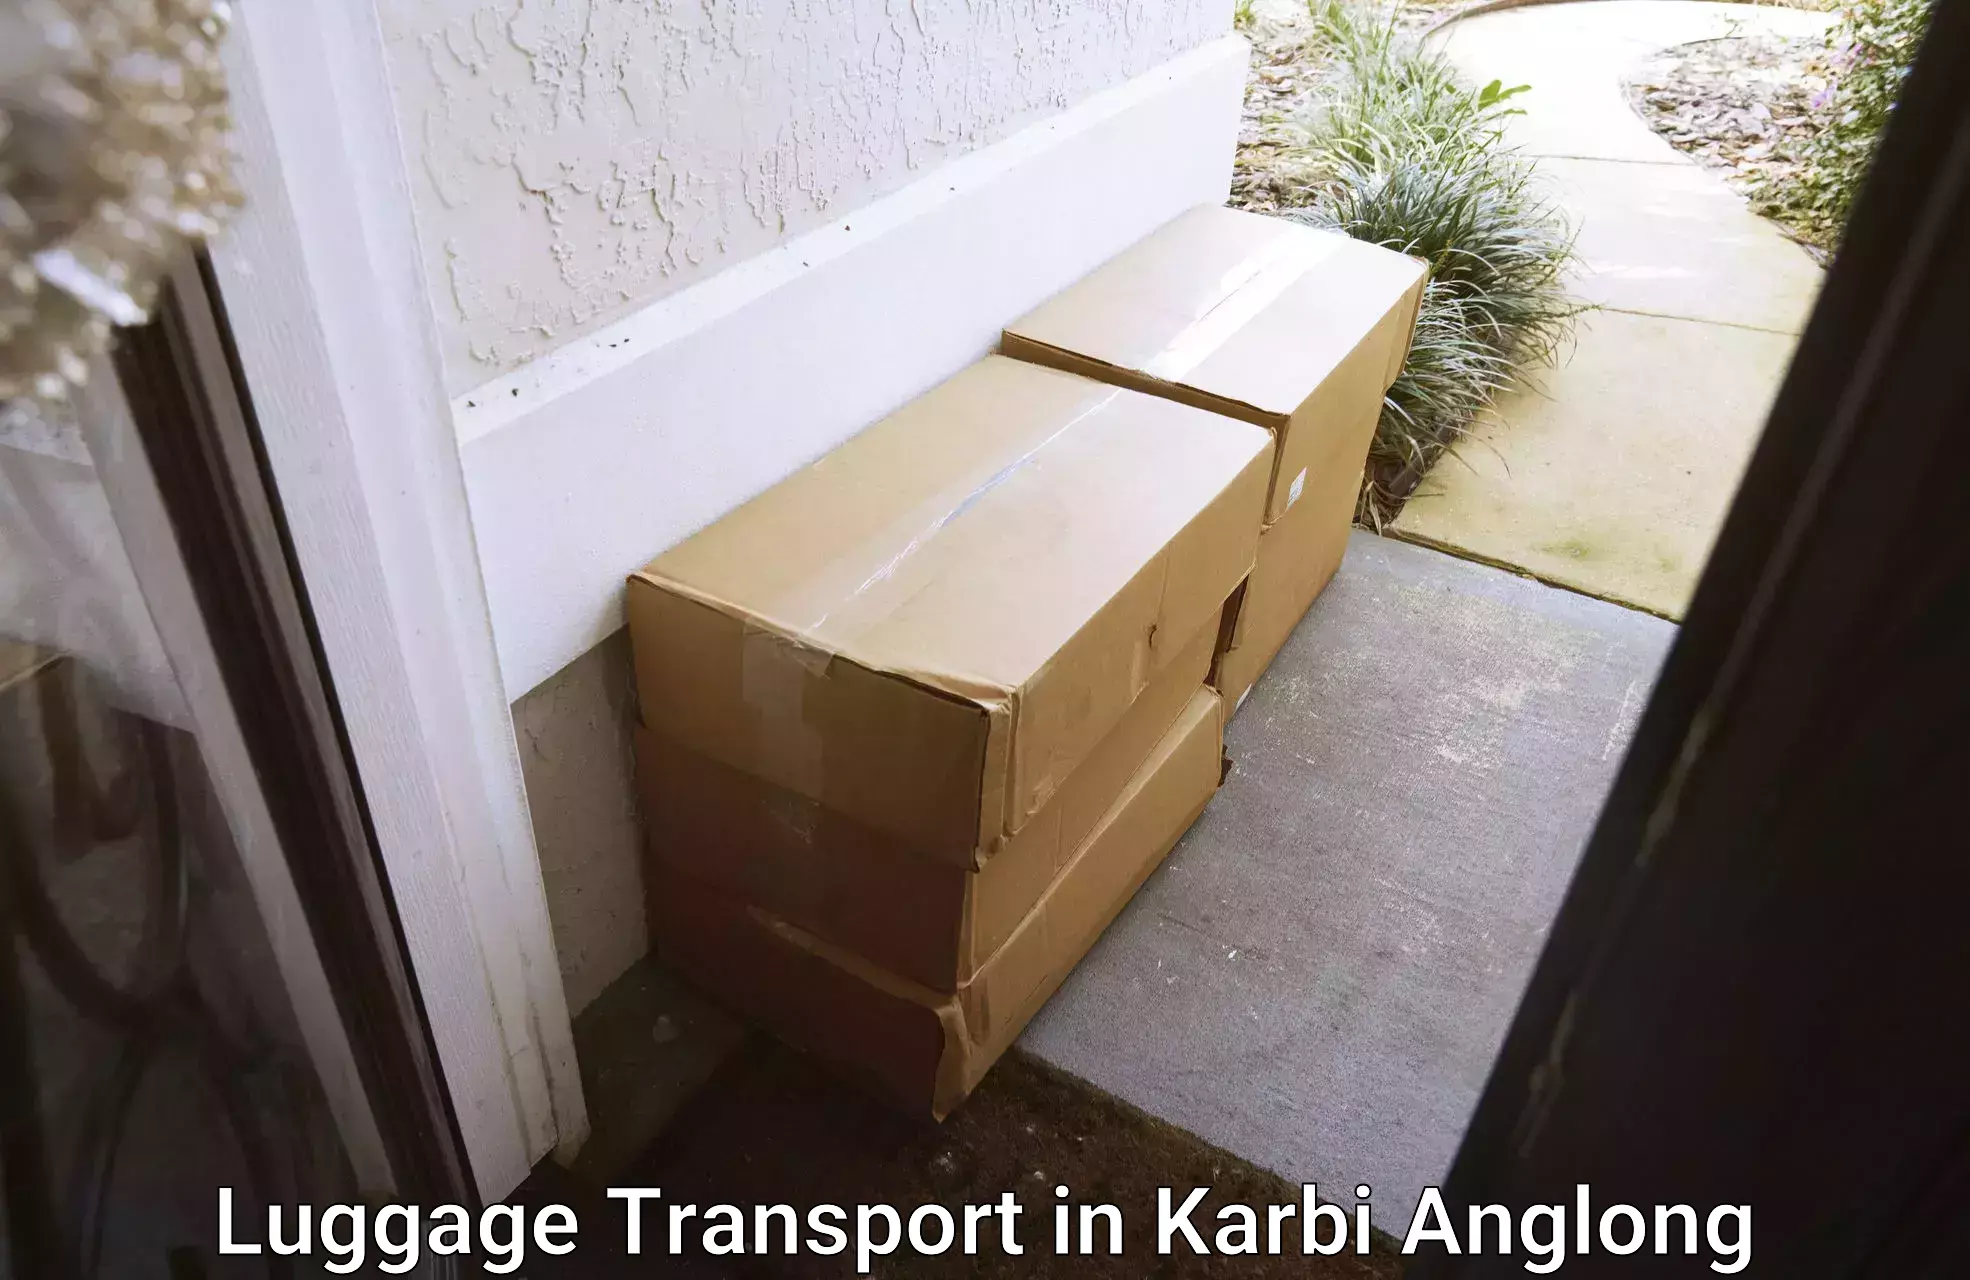 Luggage delivery operations in Karbi Anglong